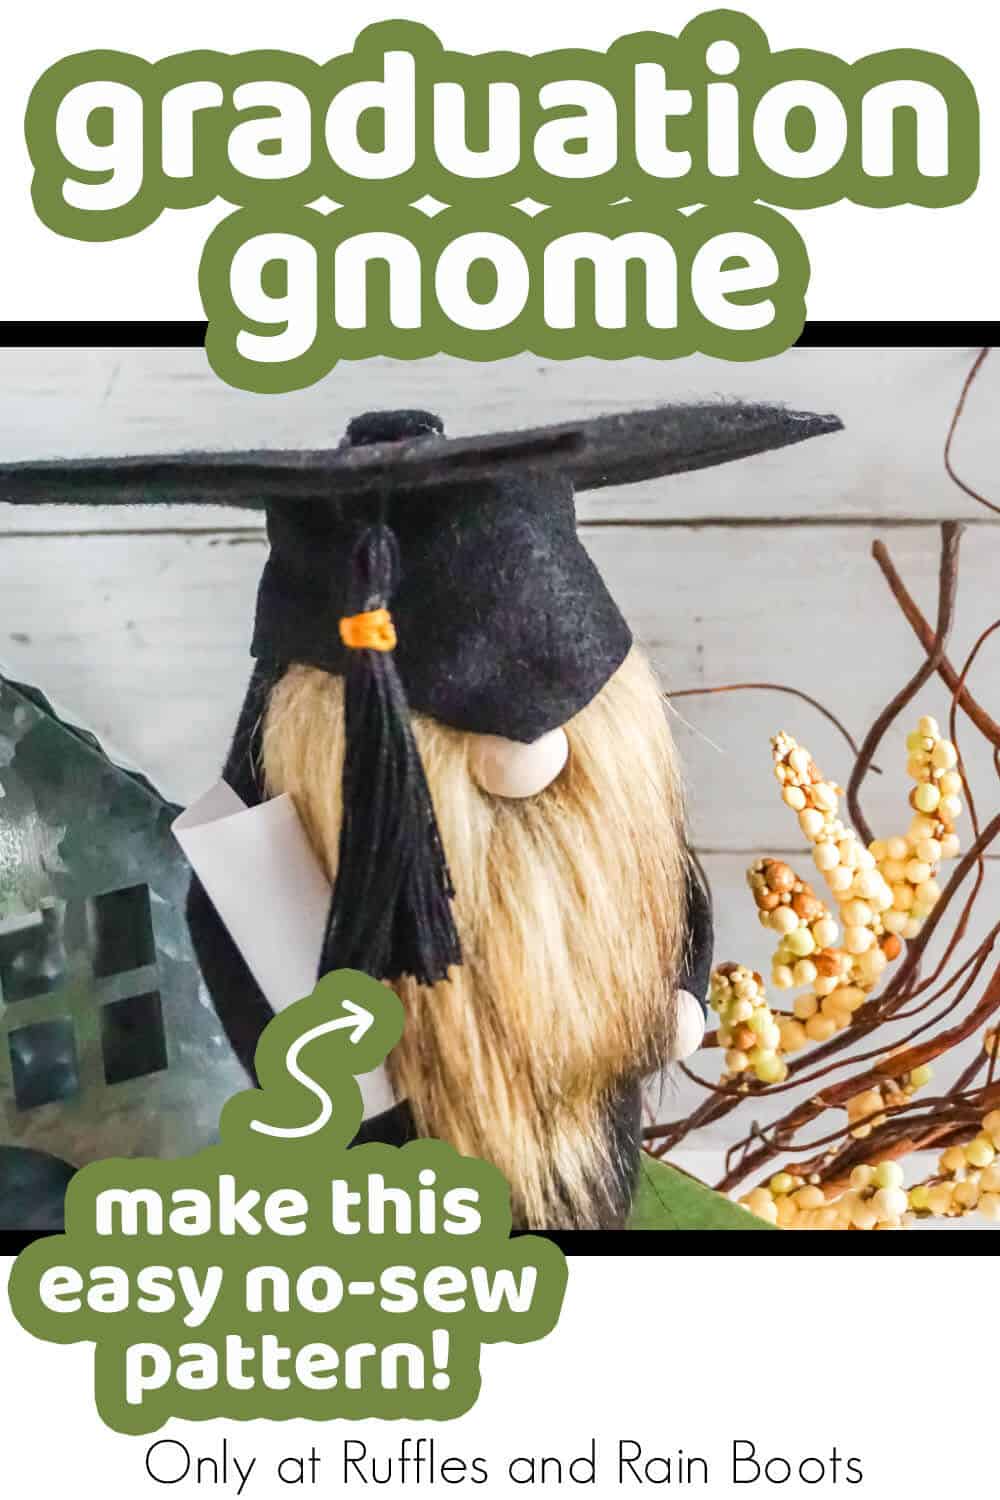 graduation cap and gown gnome pattern with text which reads graduation gnome make this easy no-sew pattern!